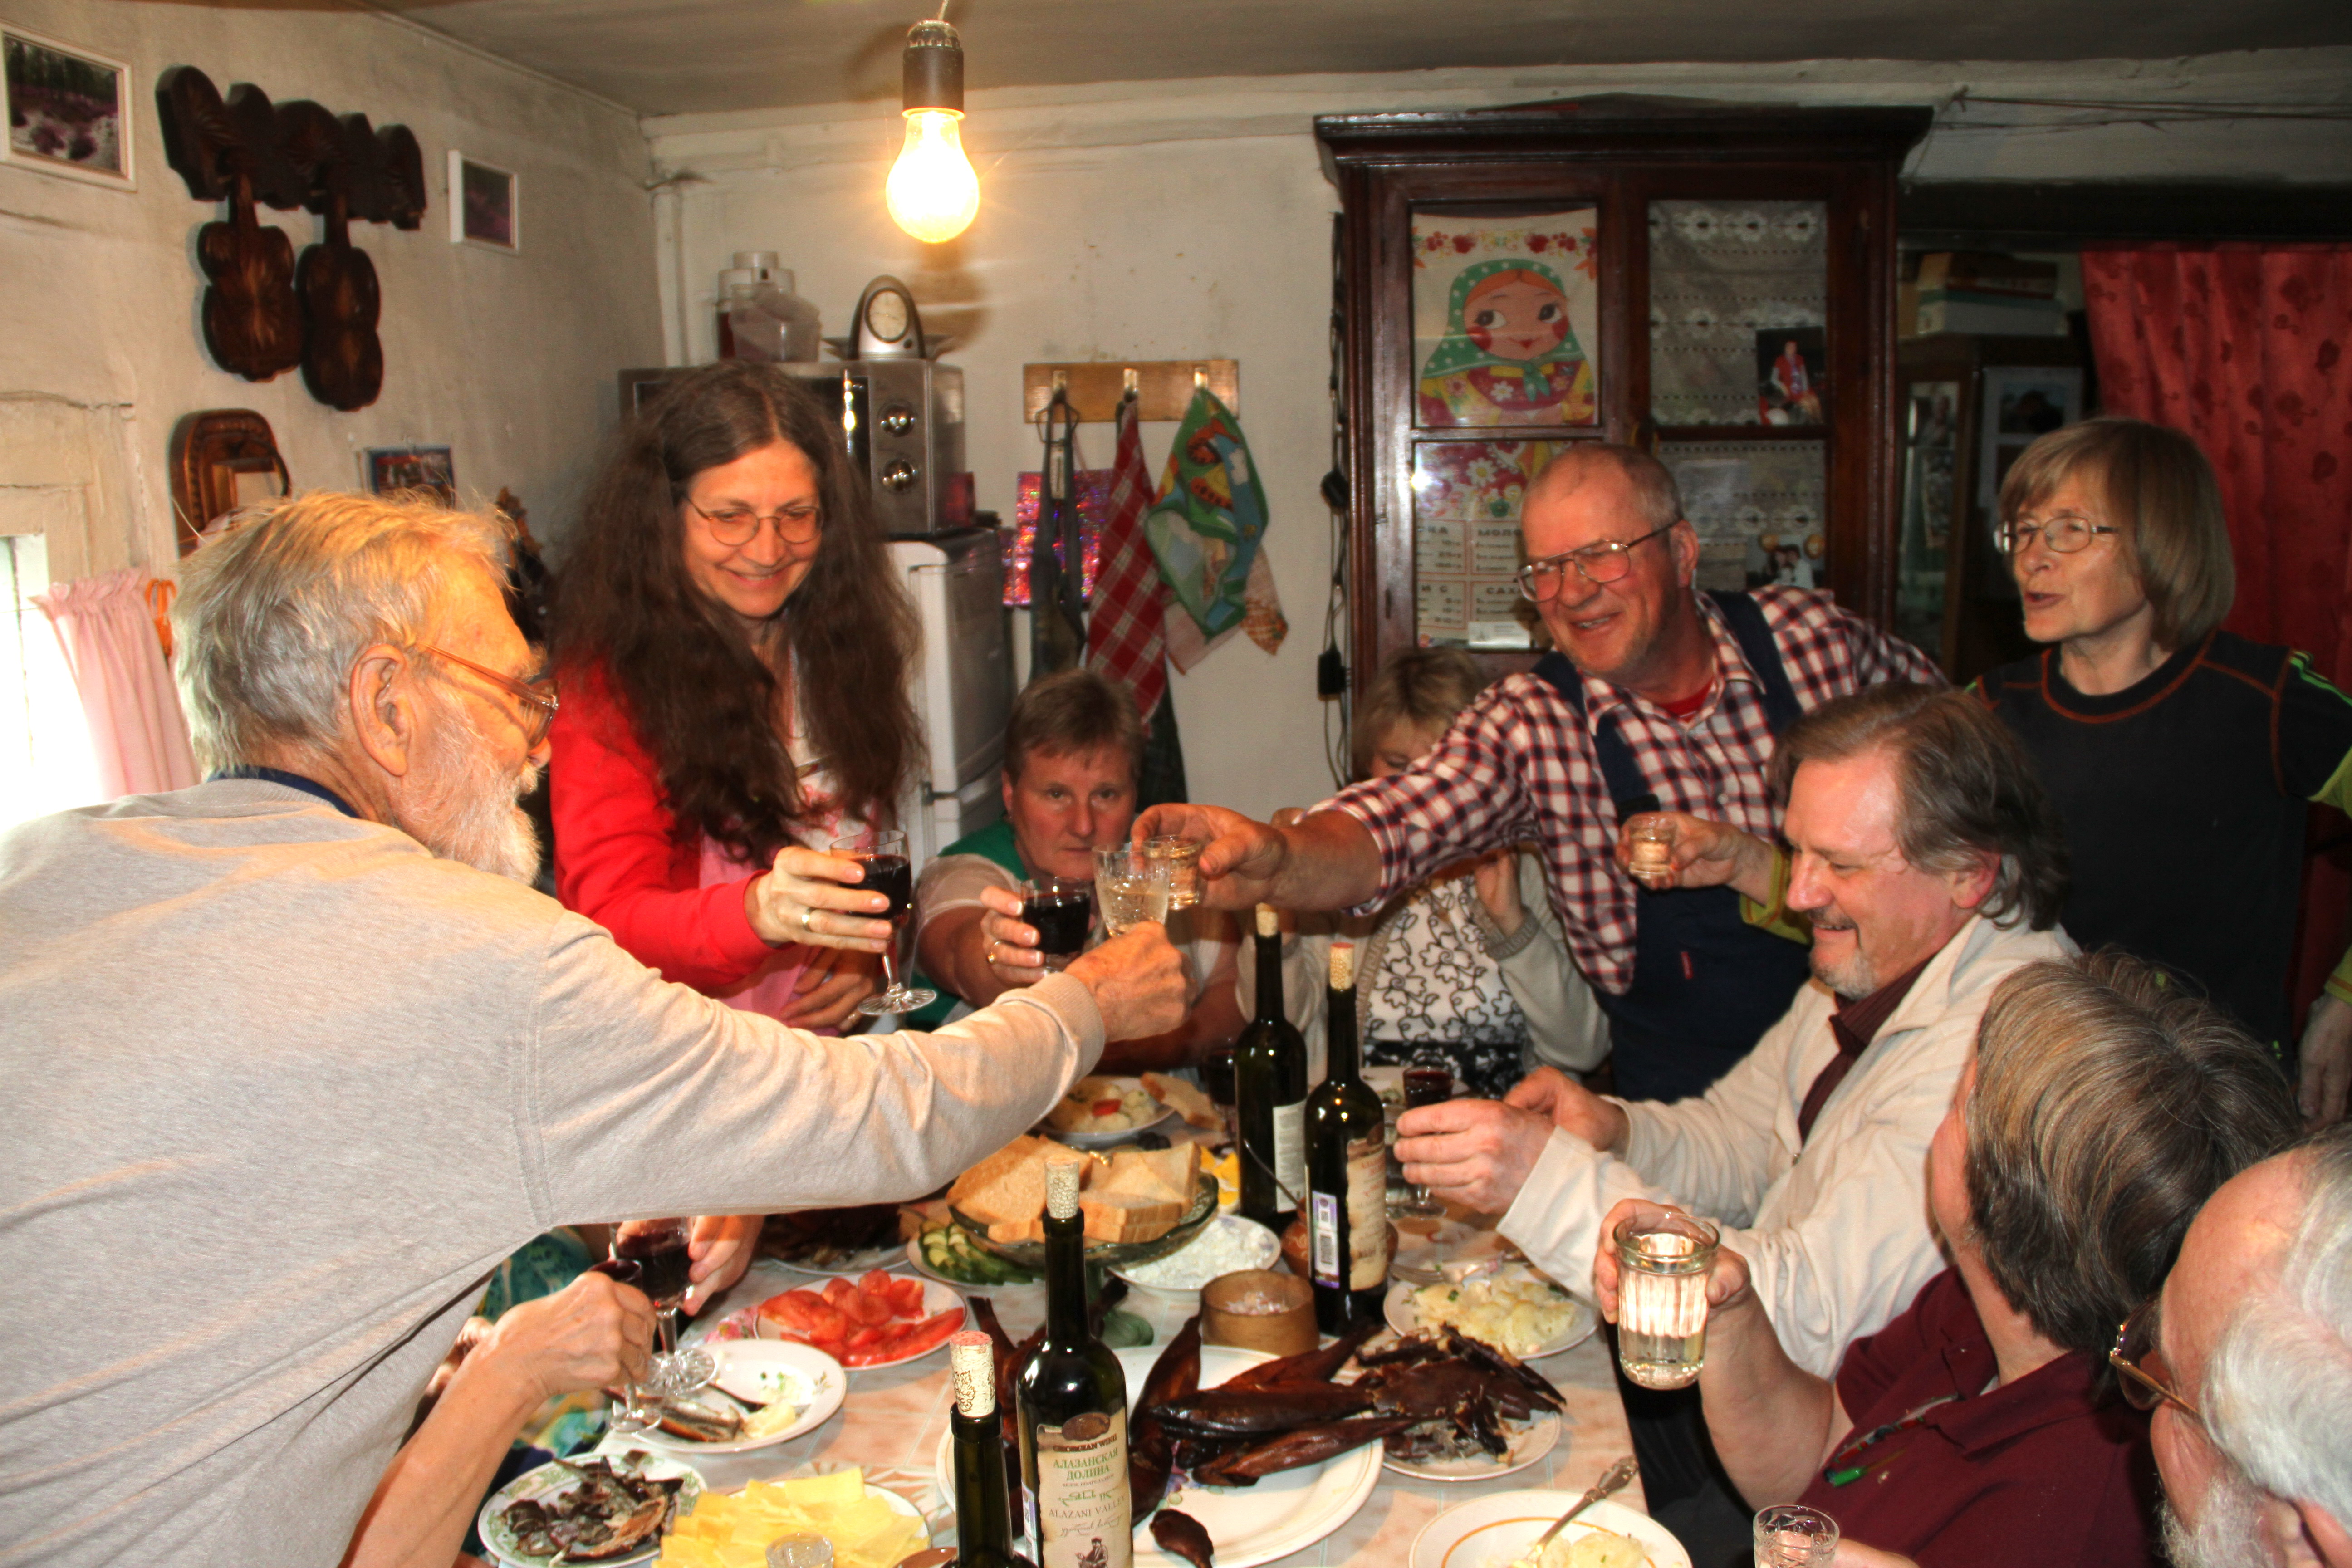 Group toasting at dinner table